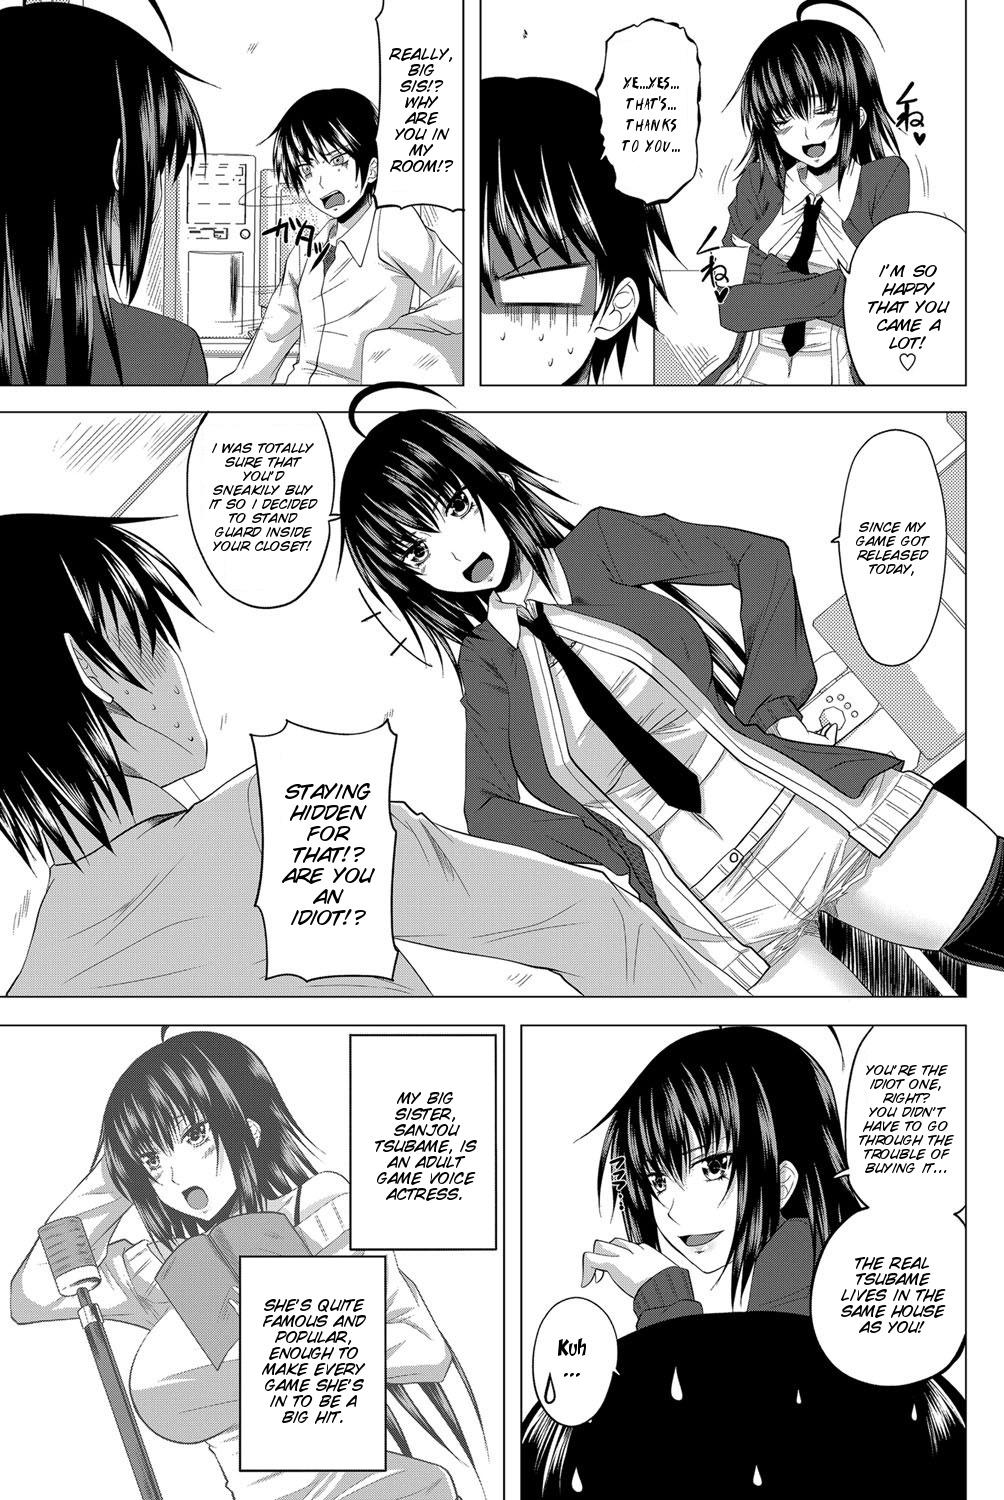 1080p Sister Work Pick Up - Page 5